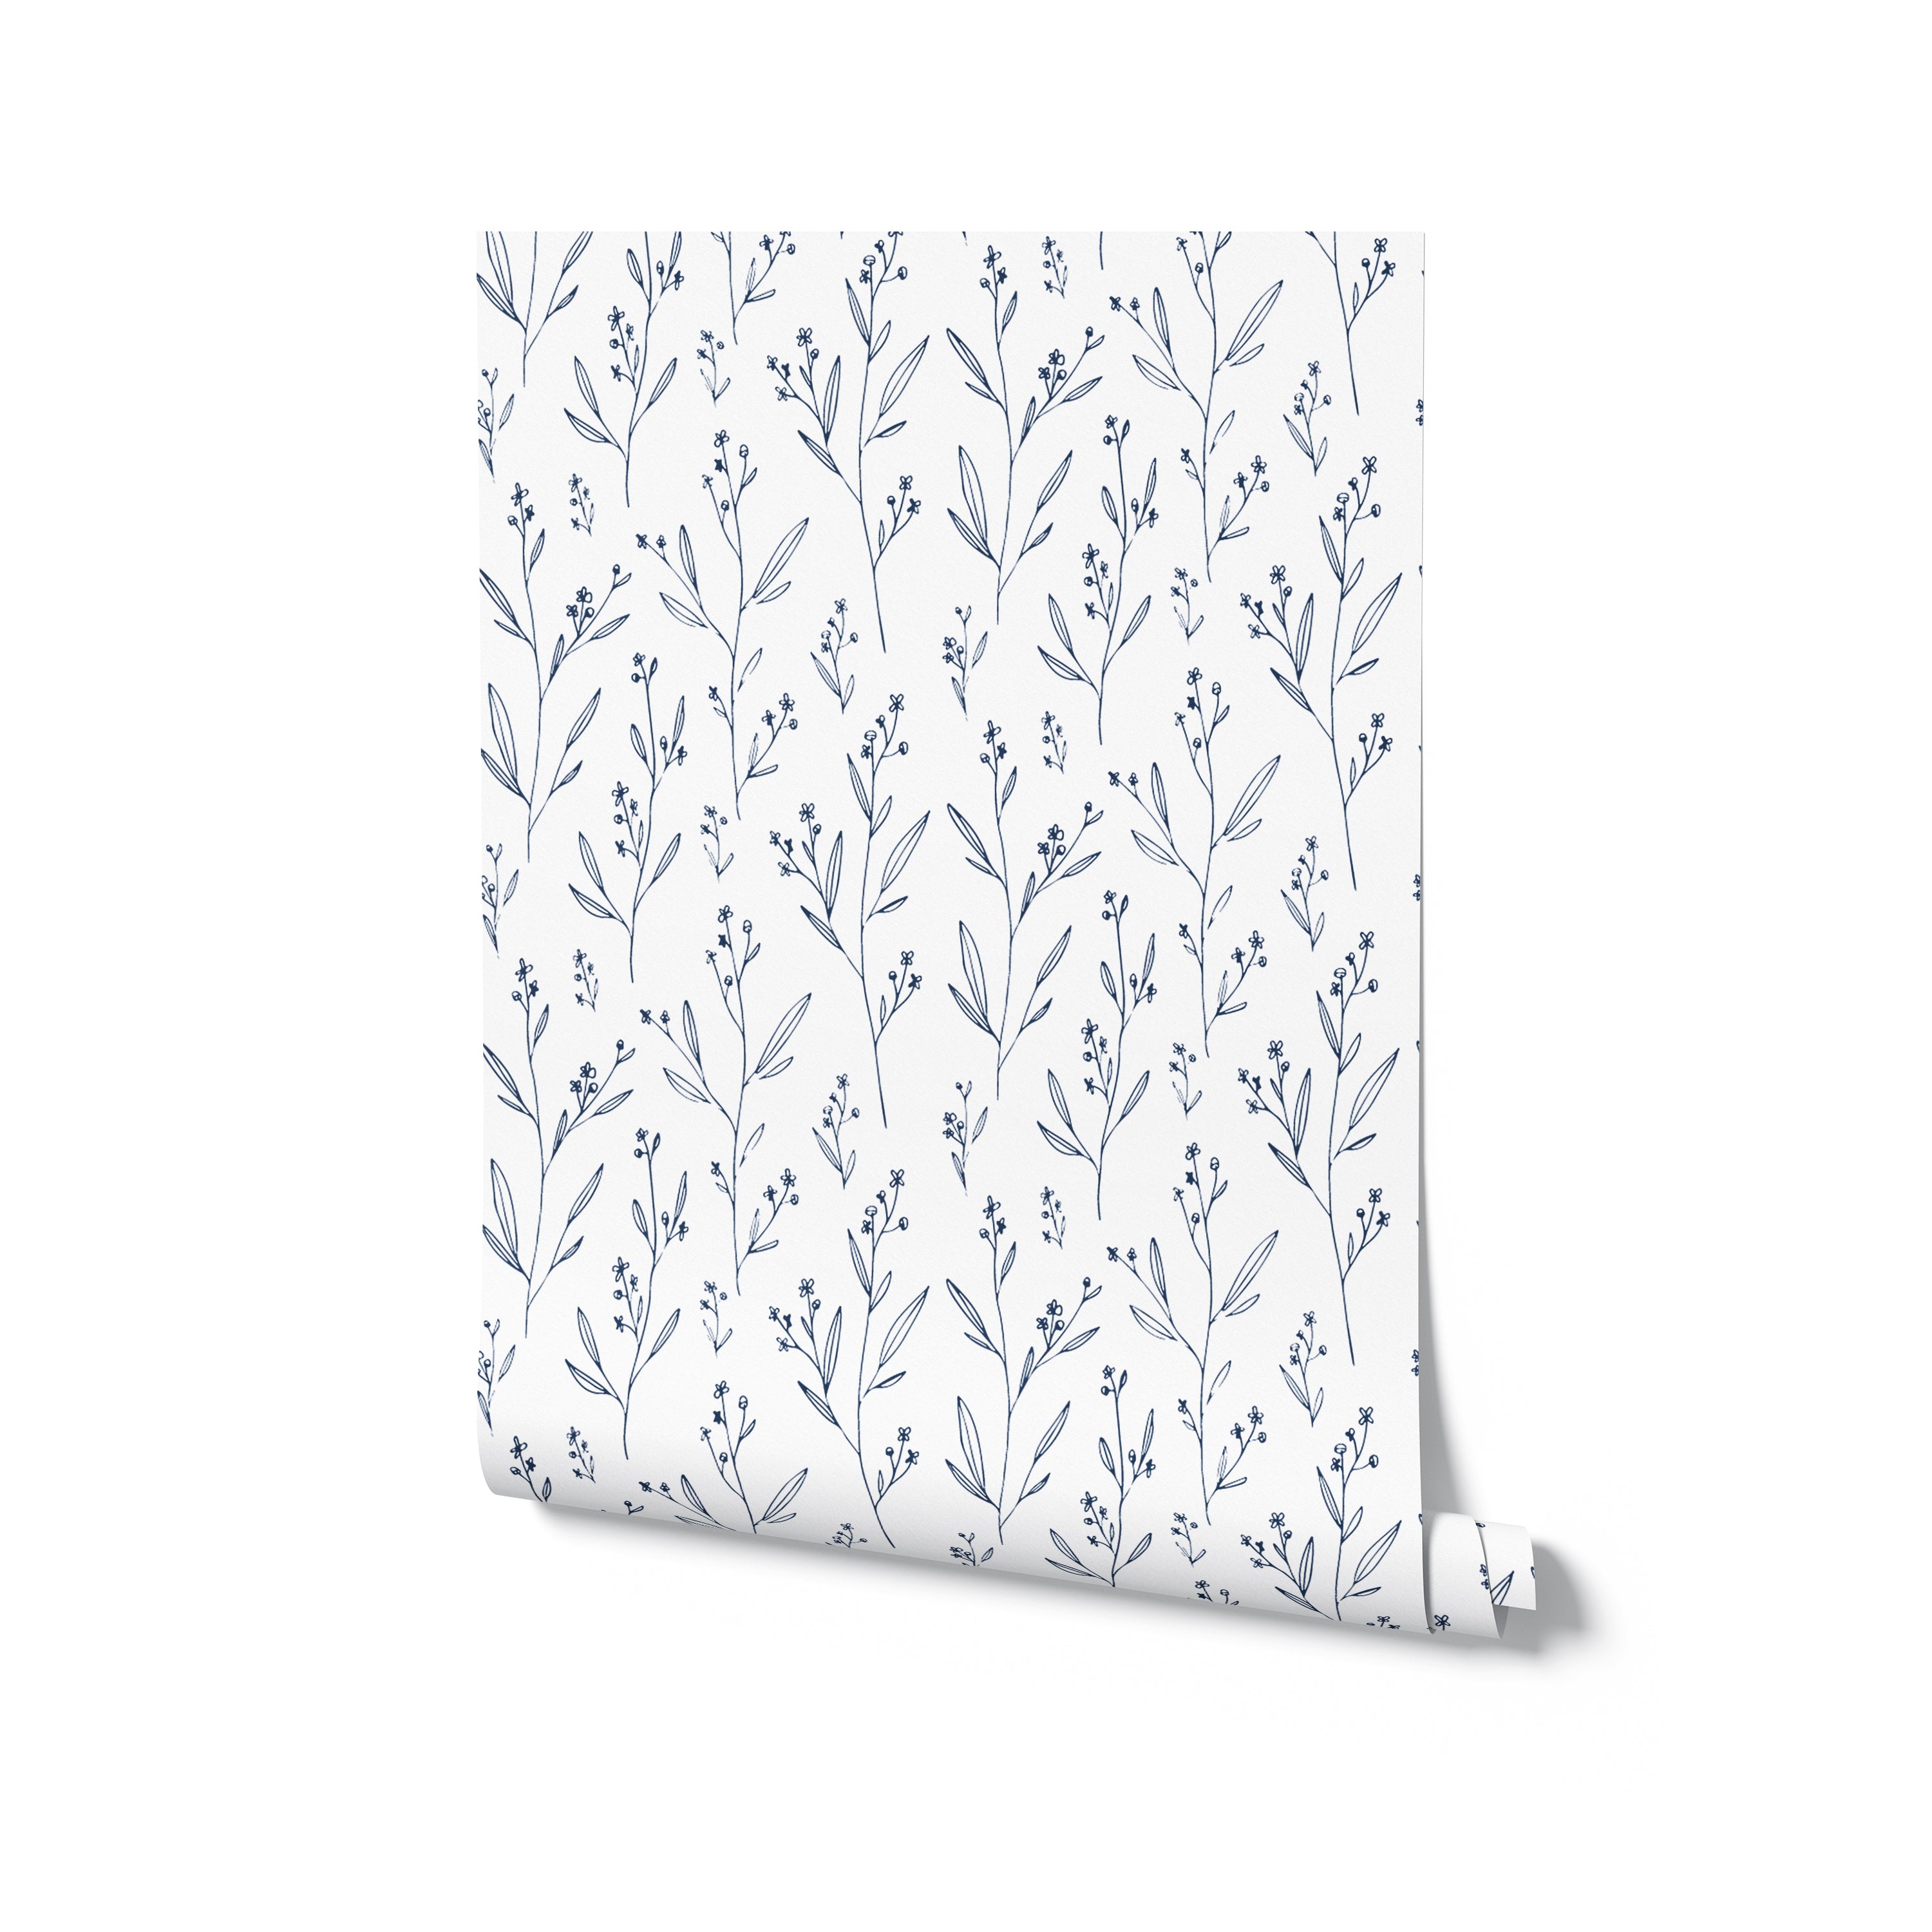 Roll of Dainty Minimal Floral Wallpaper displaying a repeating pattern of delicate linear flowers and leaves, exemplifying a simple yet sophisticated design ideal for modern and minimalist decor styles